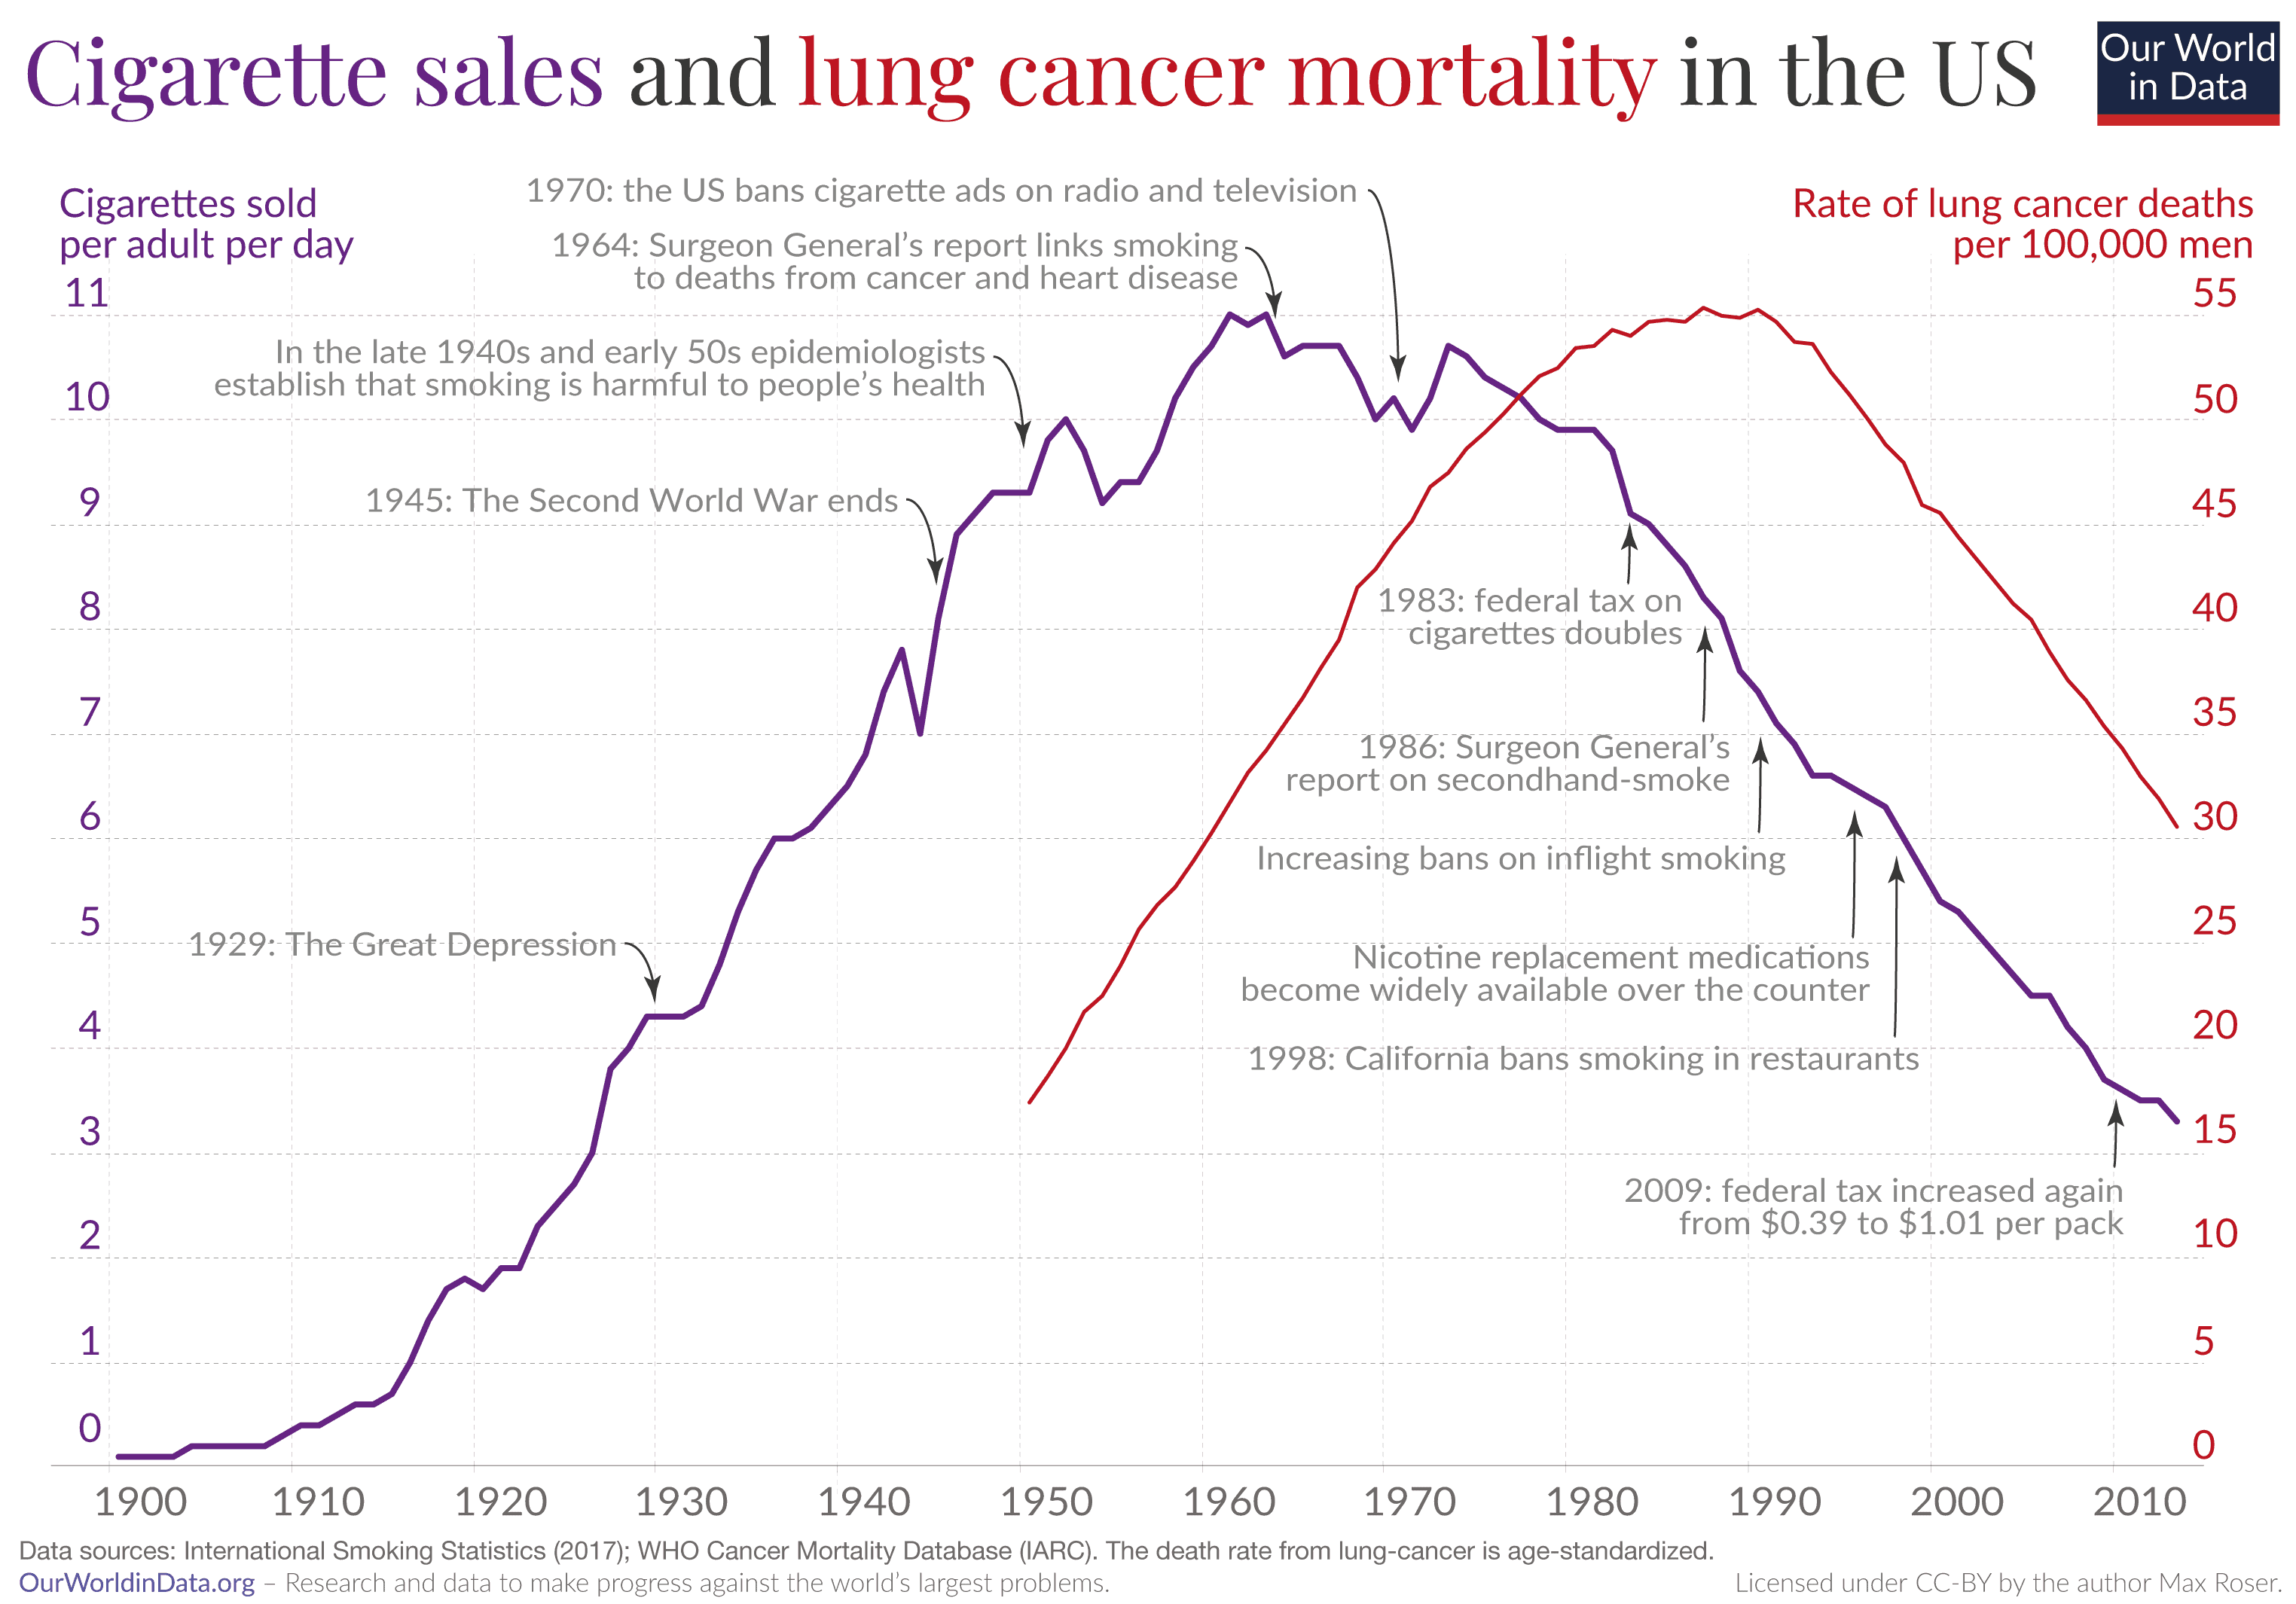 Chart showing cigarette sales and lung cancer mortality in the US from 1900 to 2010.